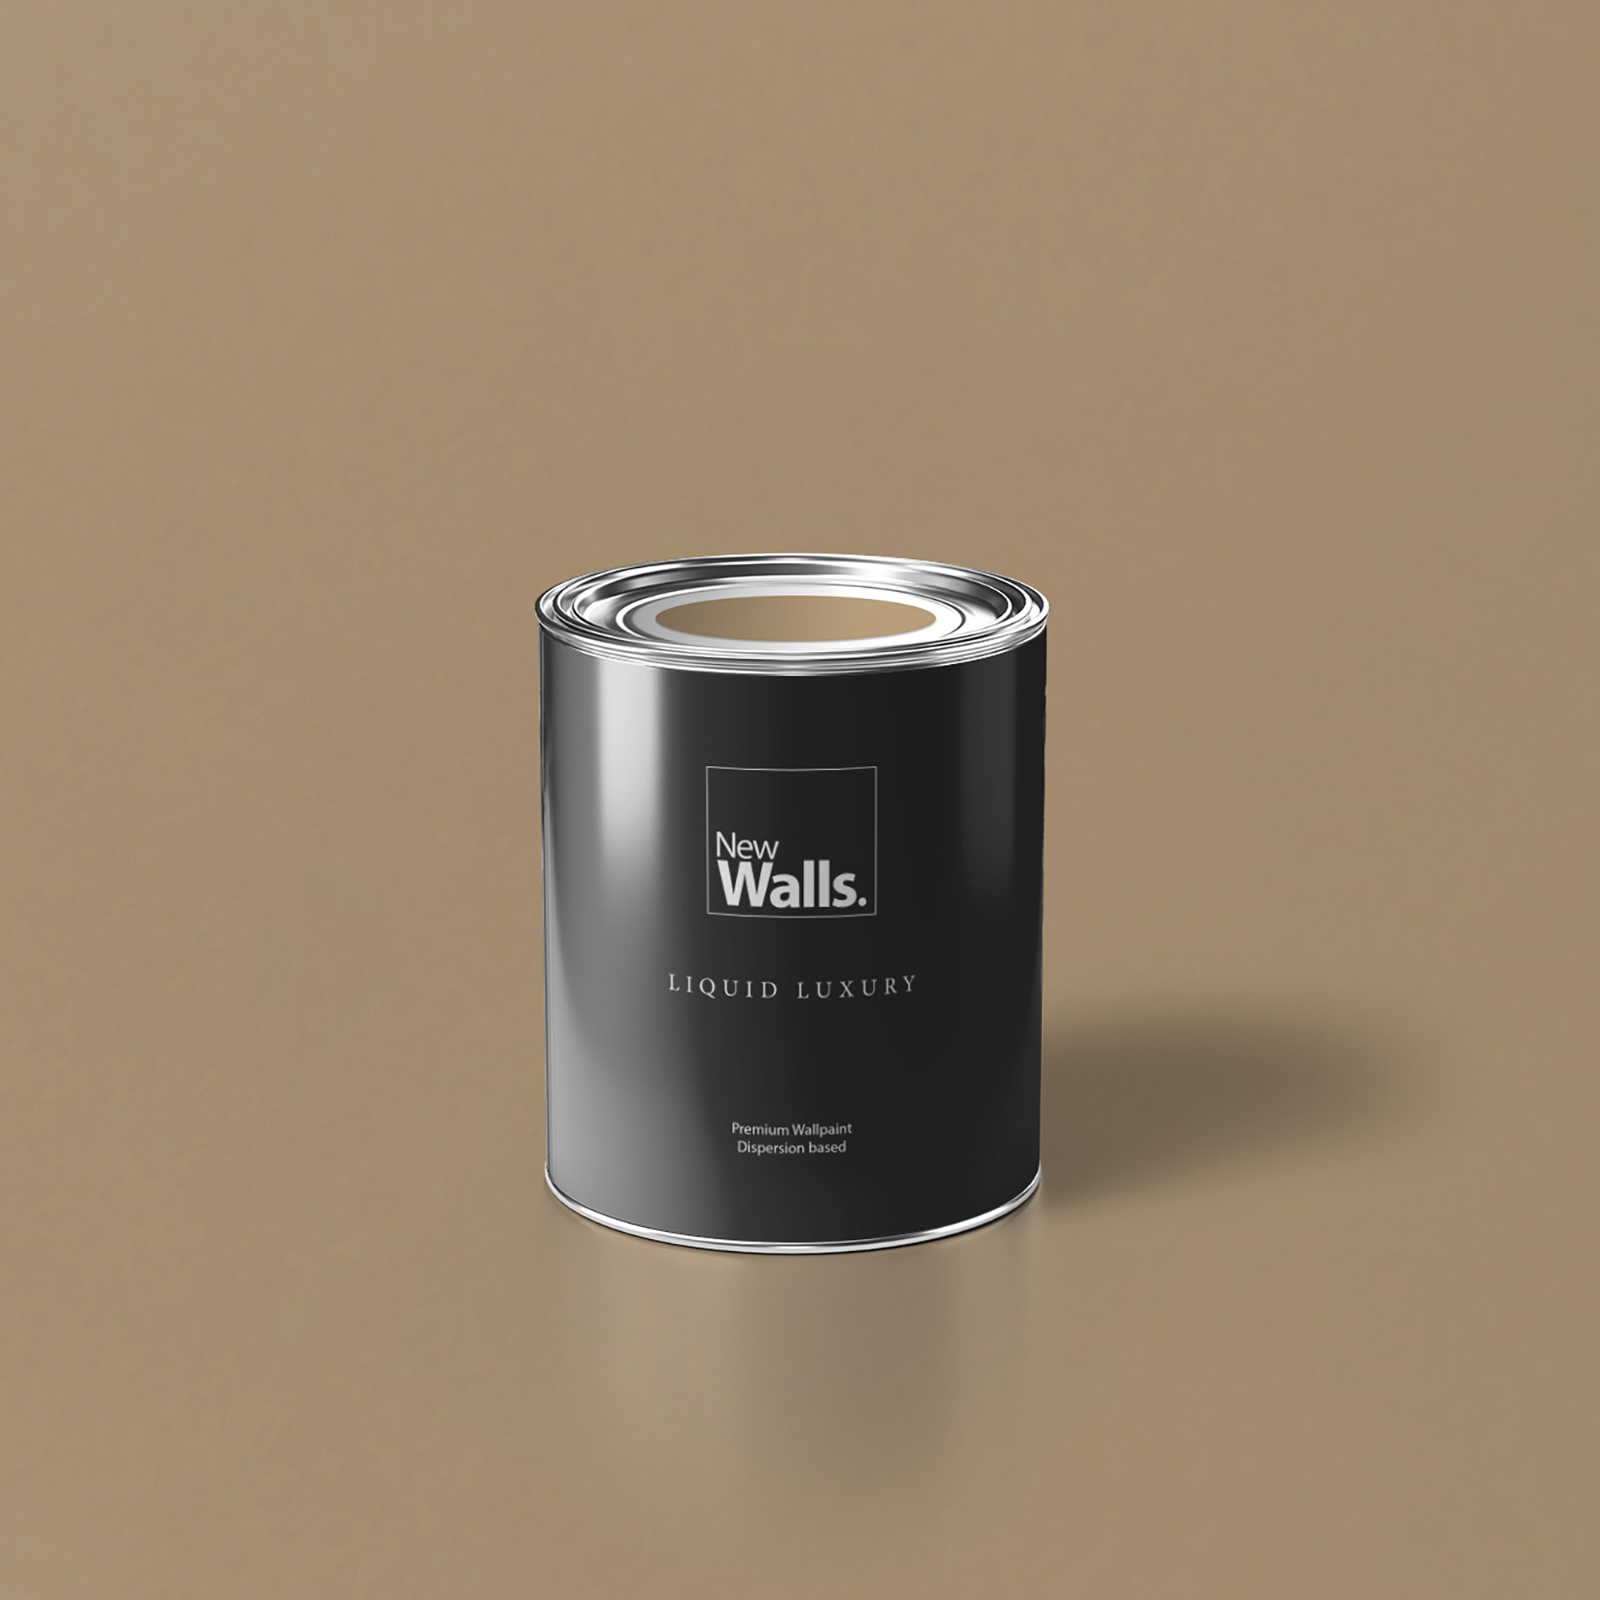         Premium Wall Paint Nature Cappuccino »Essential Earth« NW710 – 1 litre
    